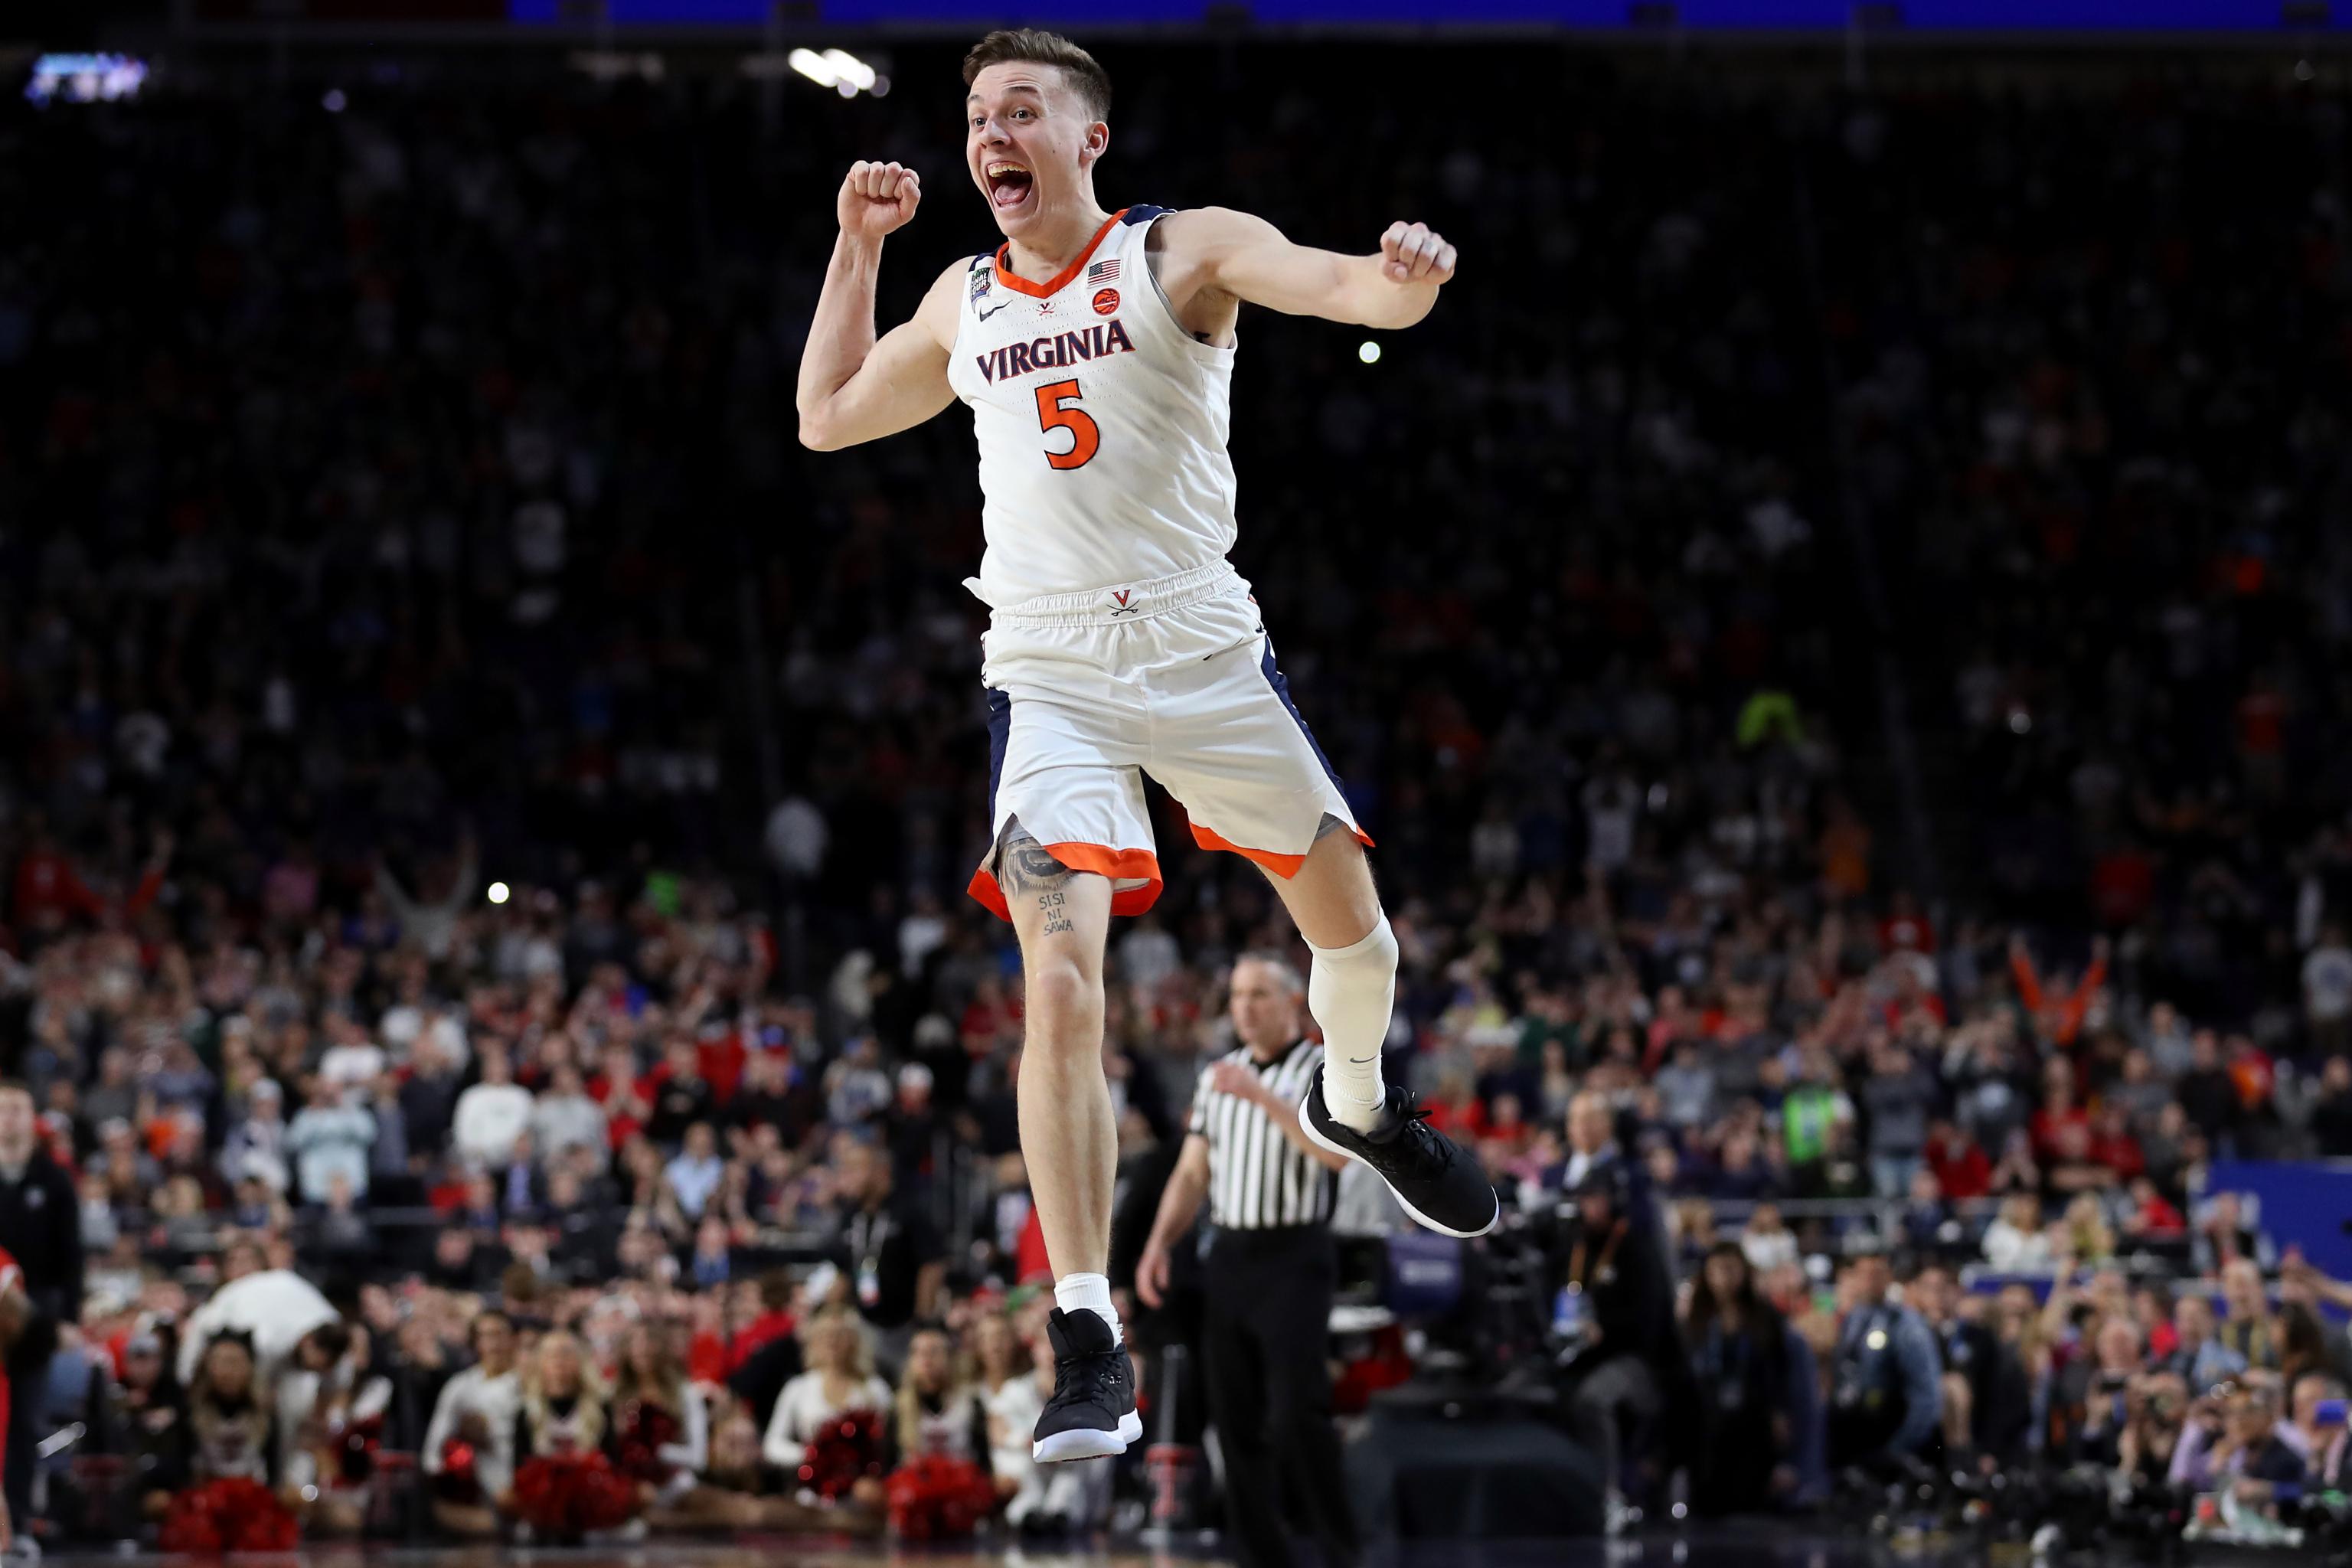 Grandpa of UVA National Champ, Kyle Guy, dies from COVID-19